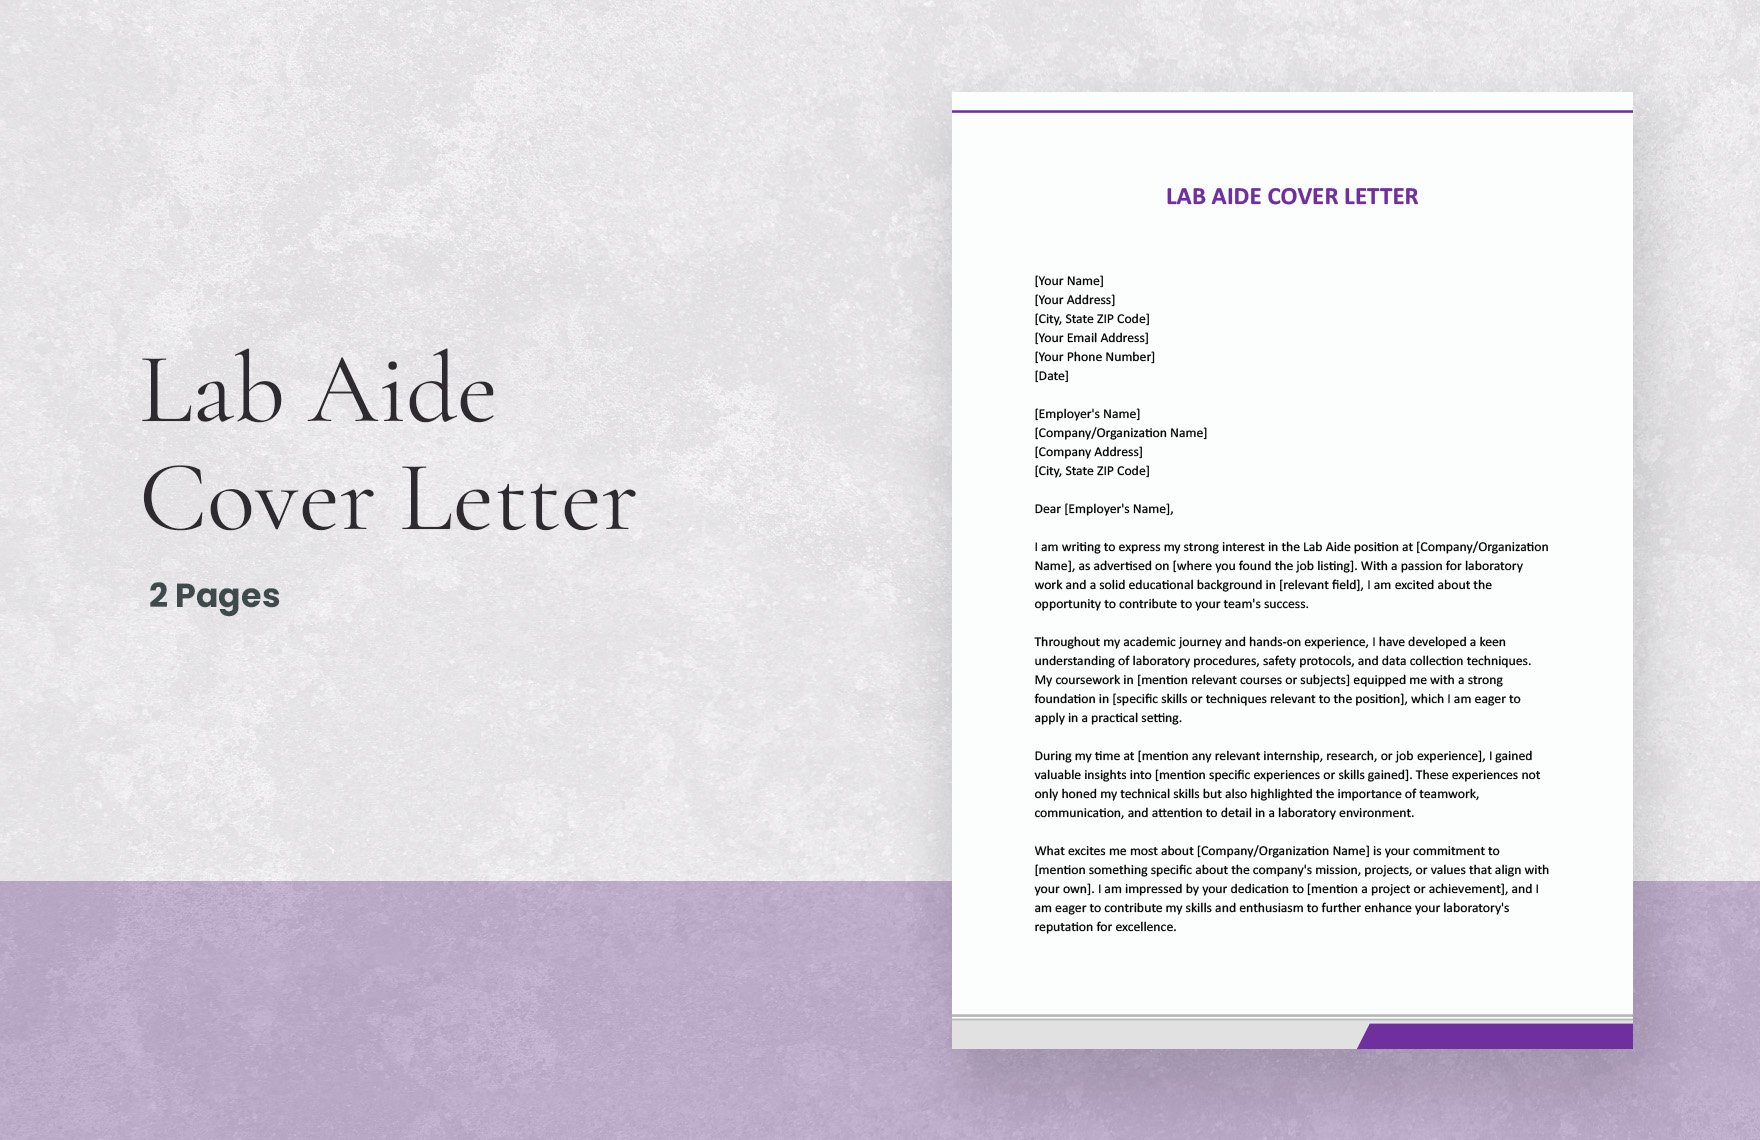 Lab Aide Cover Letter in Word, Google Docs, Apple Pages